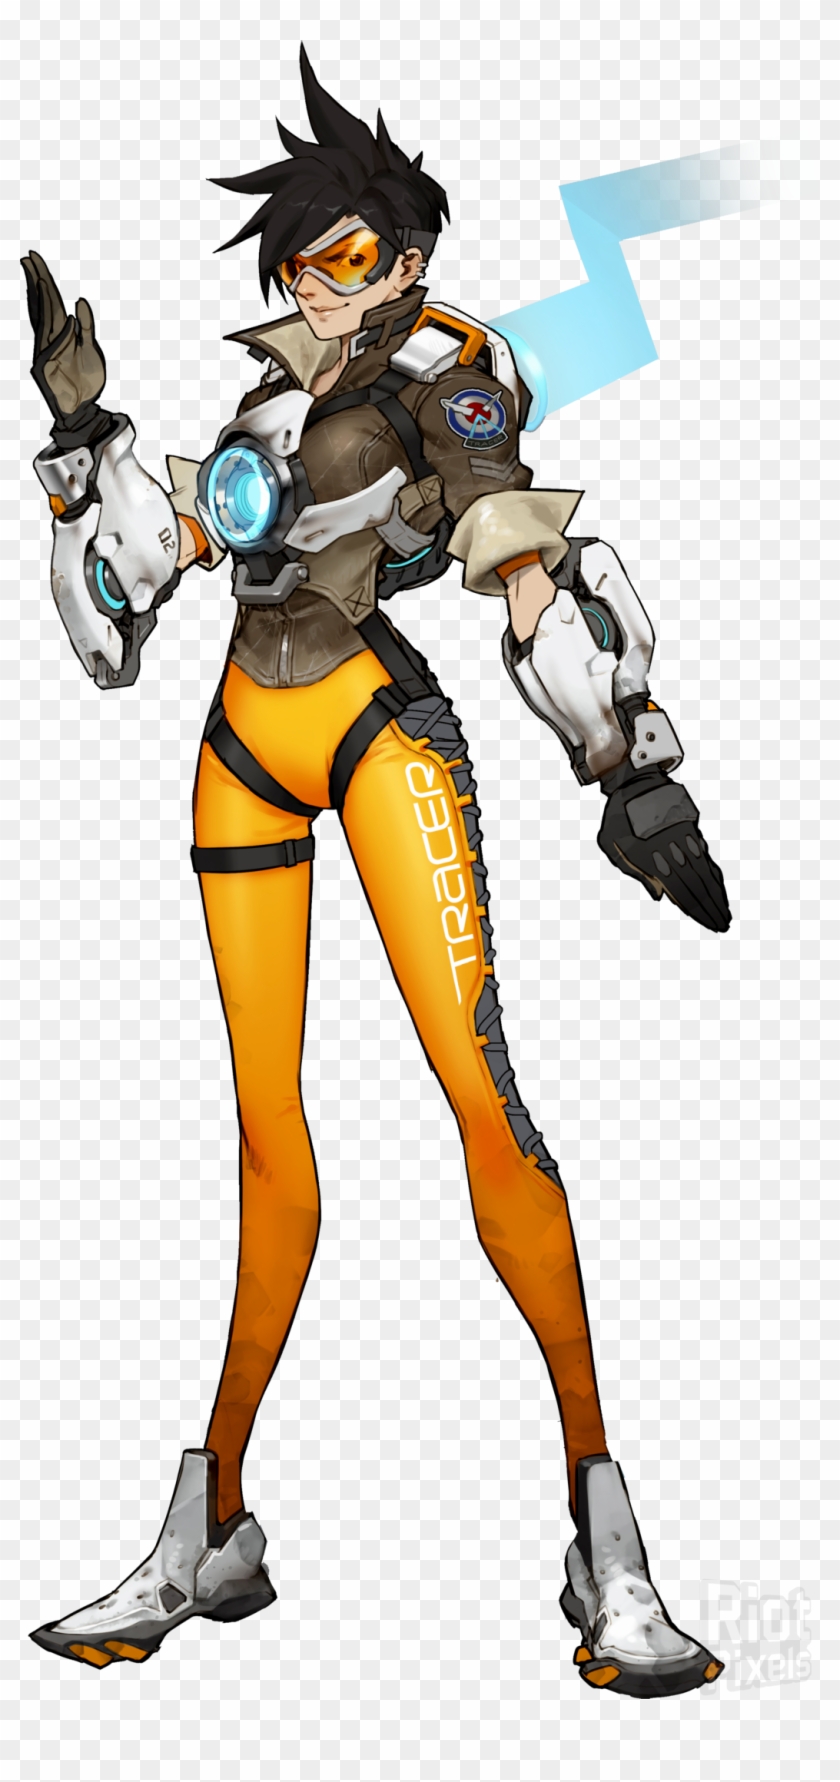 Overwatch - Tracer From Overwatch Clipart #5854218